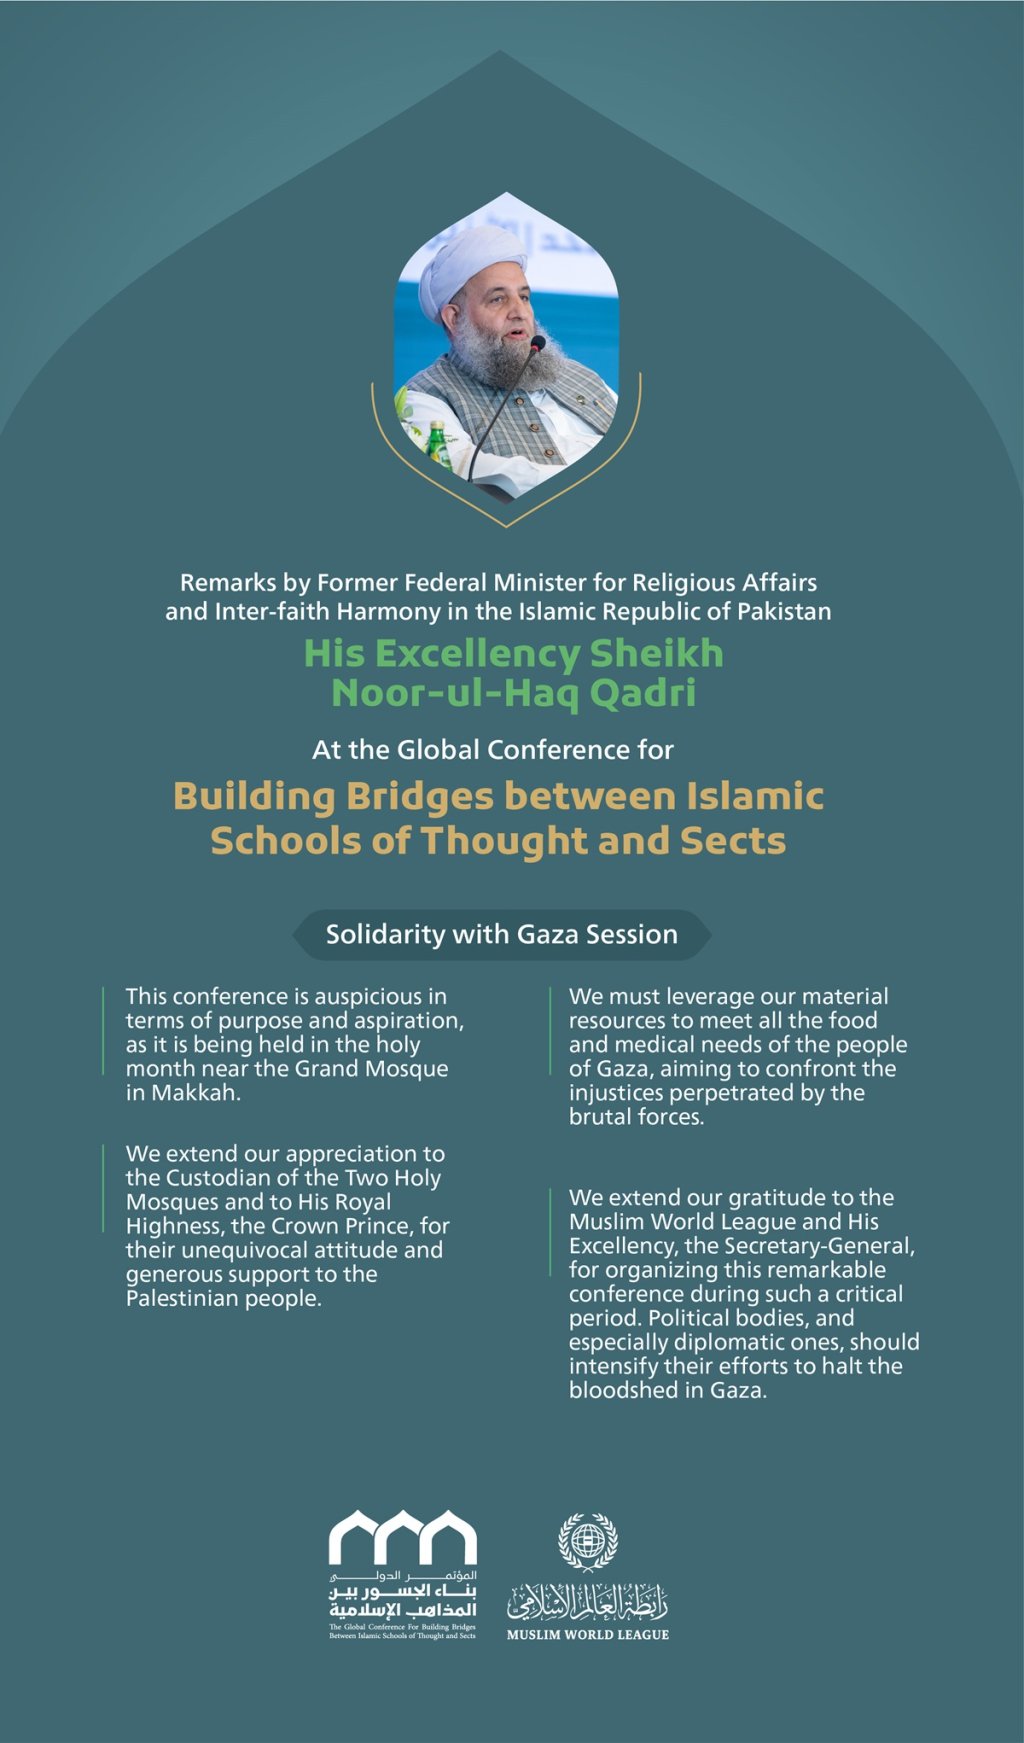 Remarks by His Excellency Sheikh Noor-ul-Haq Qadri, former Federal Minister for Religious Affairs and Inter-faith Harmony, during a session in solidarity with Gaza at the Global Conference for Building Bridges between Islamic Schools of Thought and Sects.